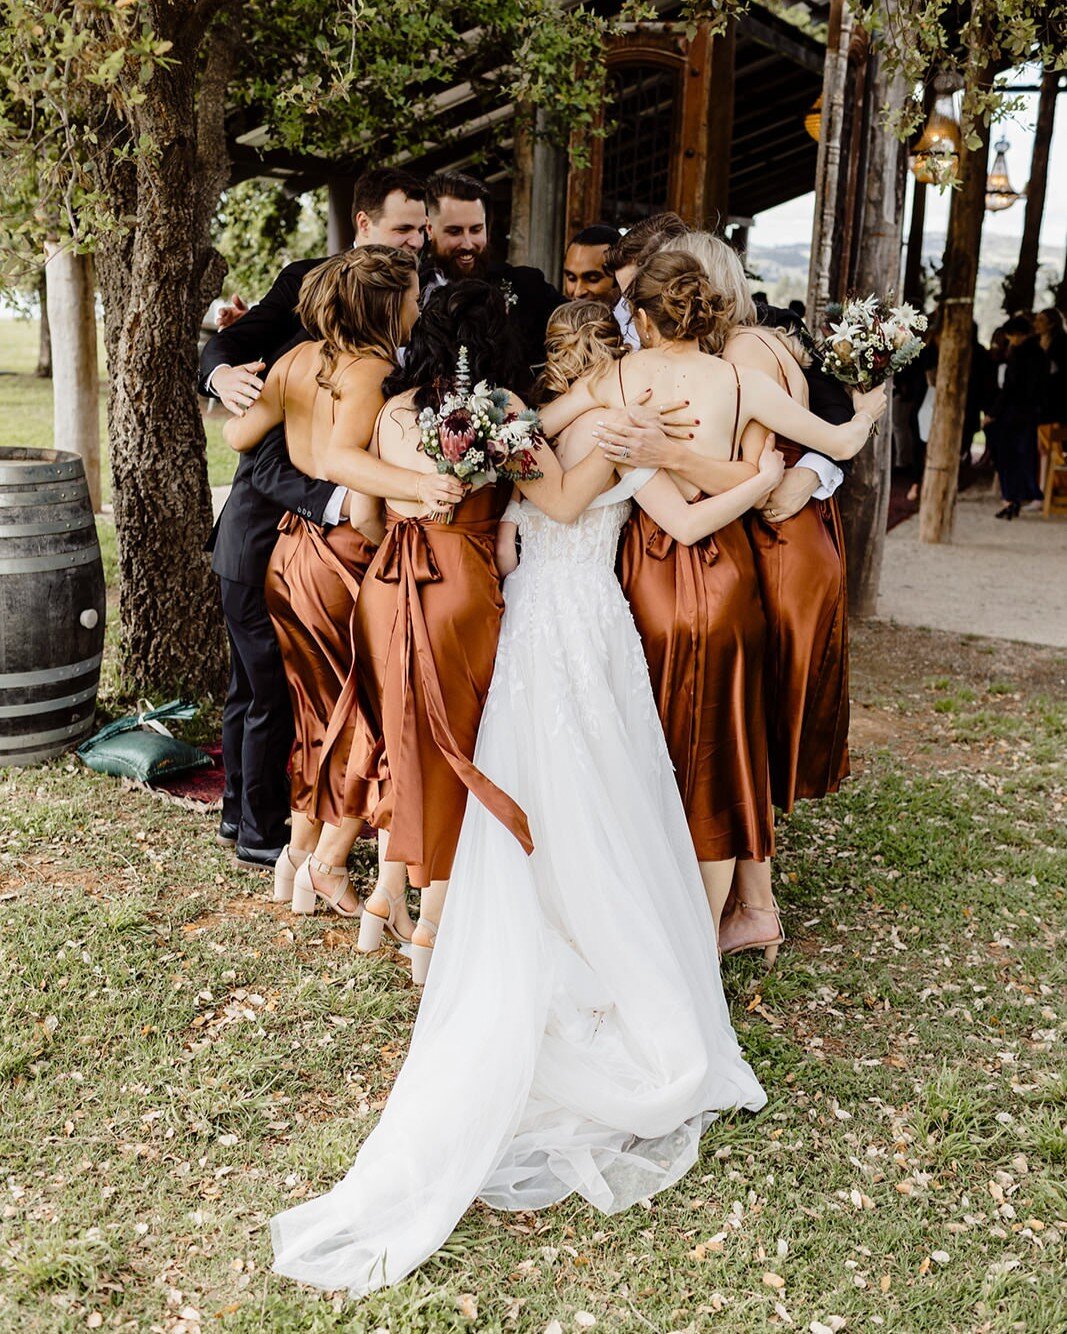 Bridal party goals with Anni and Deep! ⁣
#kirstencunninghamphotography #weddingorangensw #mudgeenswwedding #countryweddingnsw  #mudgeewedding #mudgeevineyardwedding #weddingphotographermudgeensw #orangenswweddingphotographer #centralwestwedding #phot